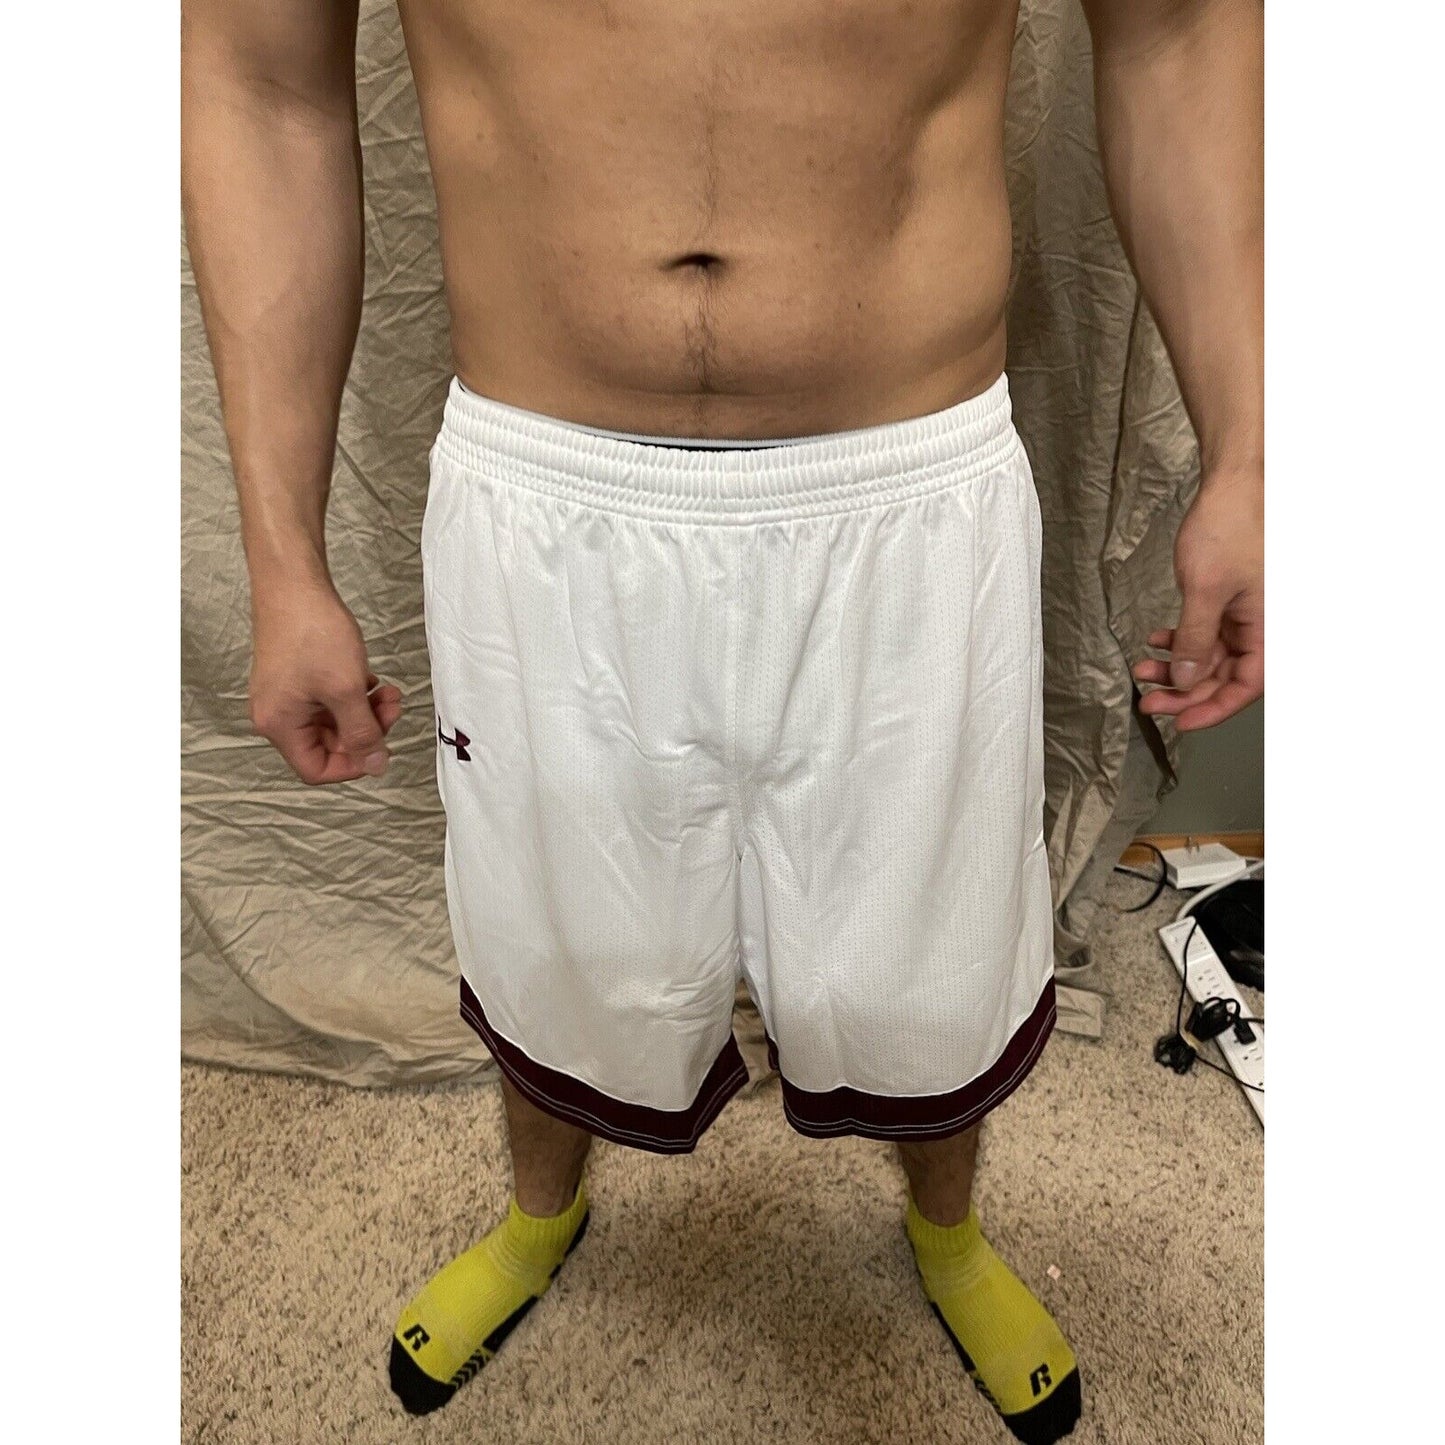 Boy's under armour Youth XL white and Maroon Lacrosse style shorts no pockets